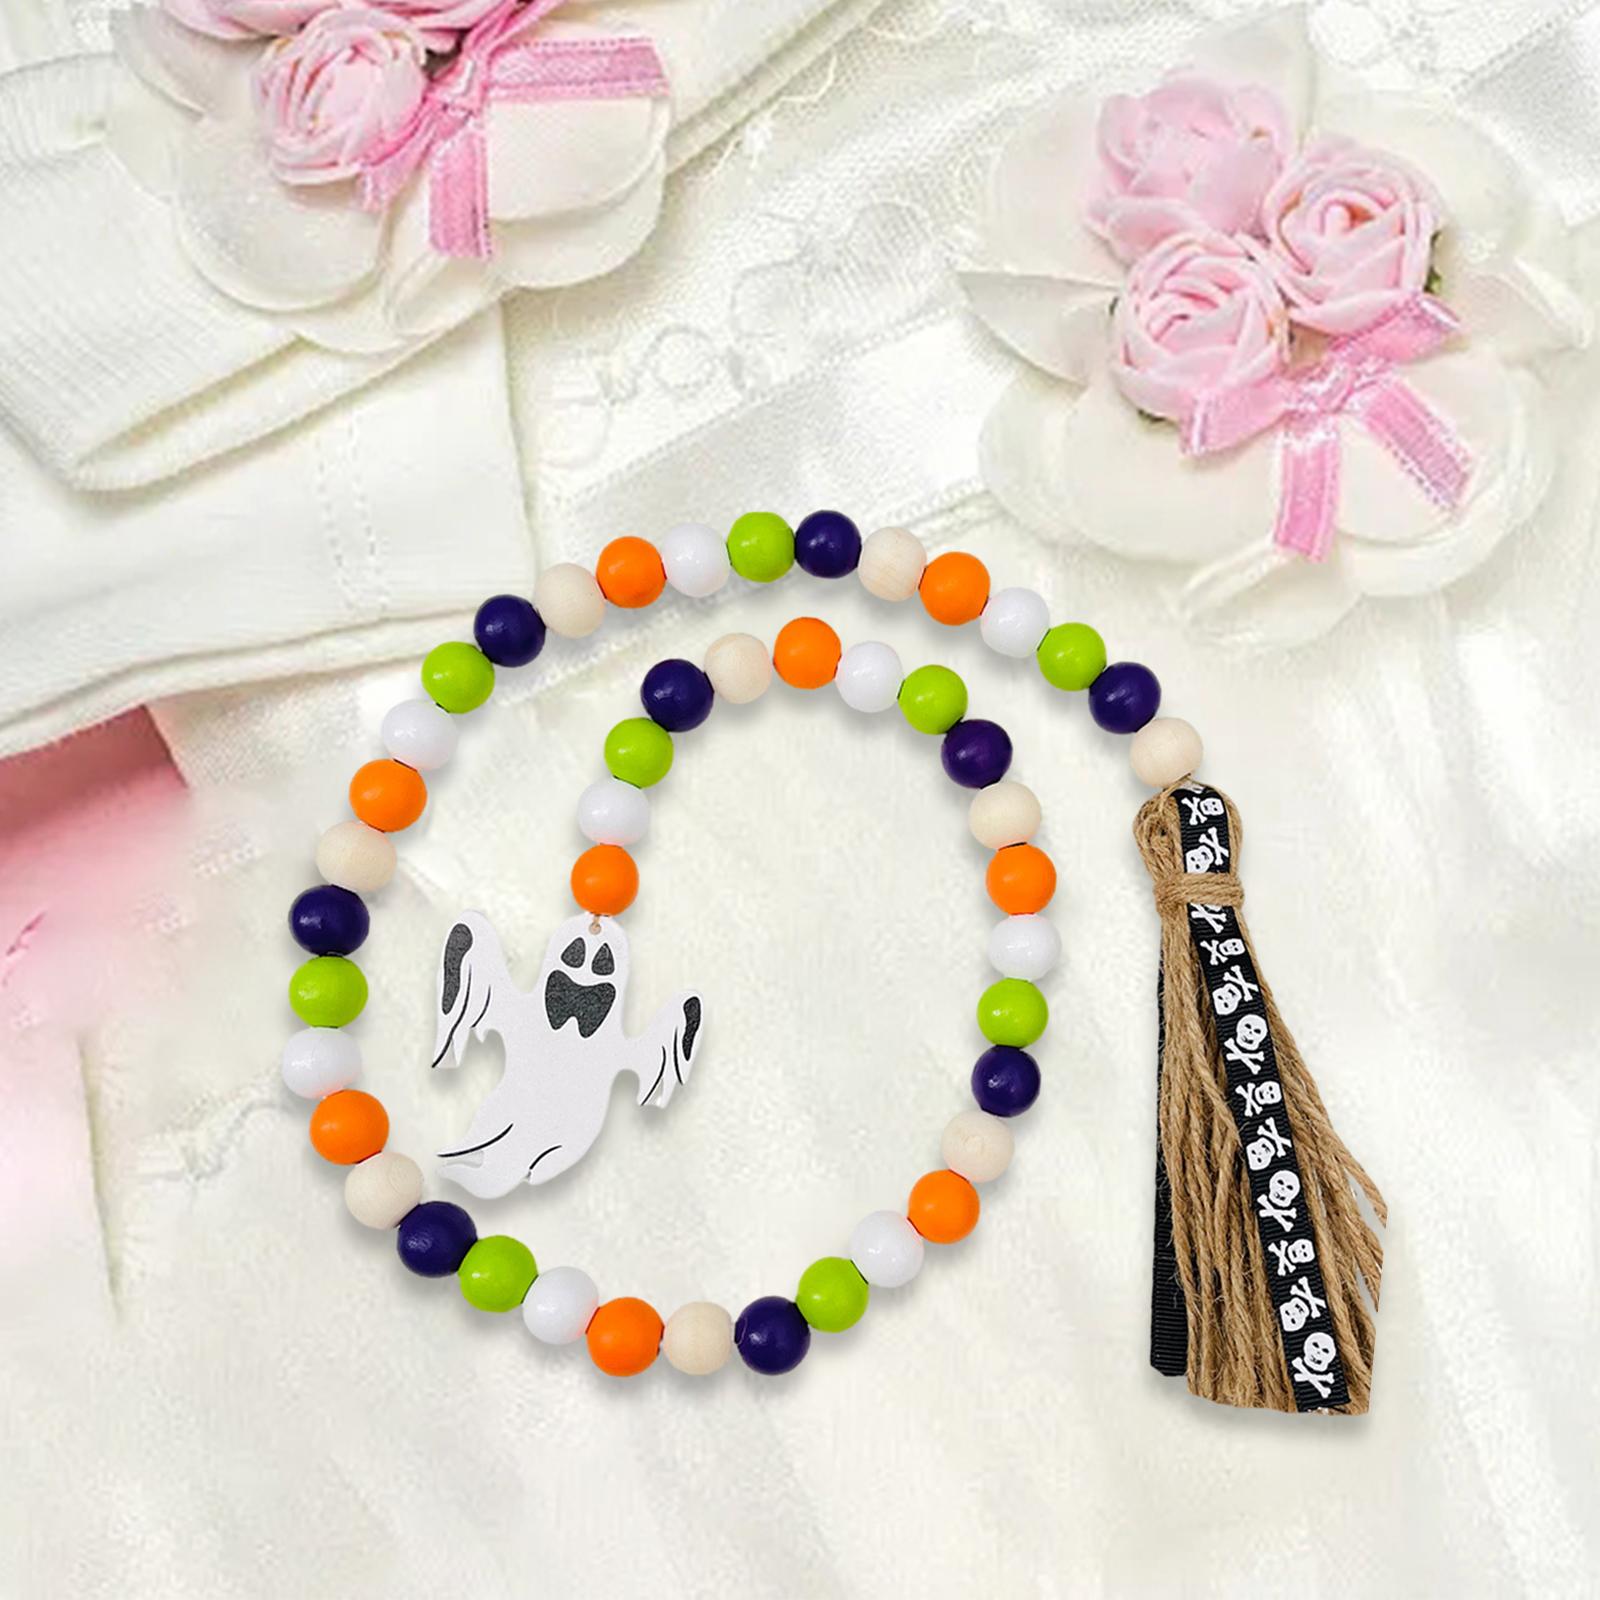 Halloween Wood Bead Garland with Tassels Art for Home Bedroom Party Supplies White Pendant